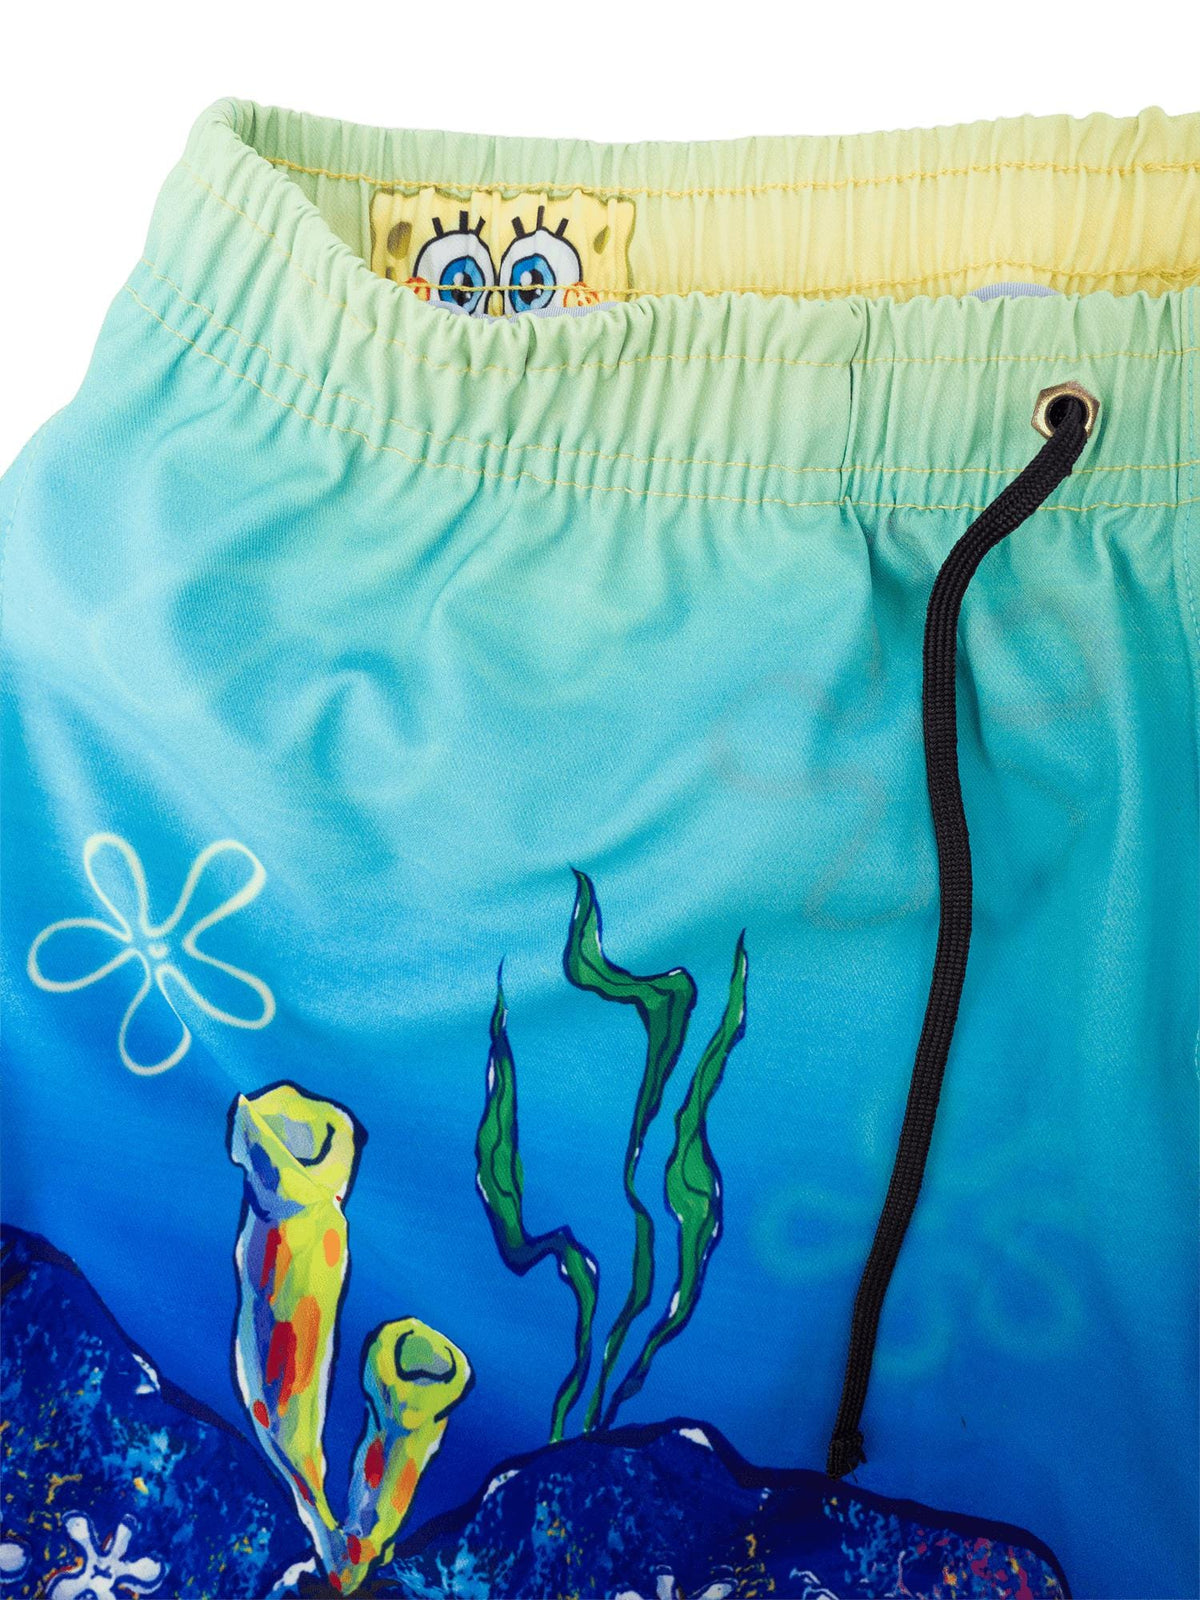 Detail image of front of shorts showing SpongeBob peeking out from the waistband